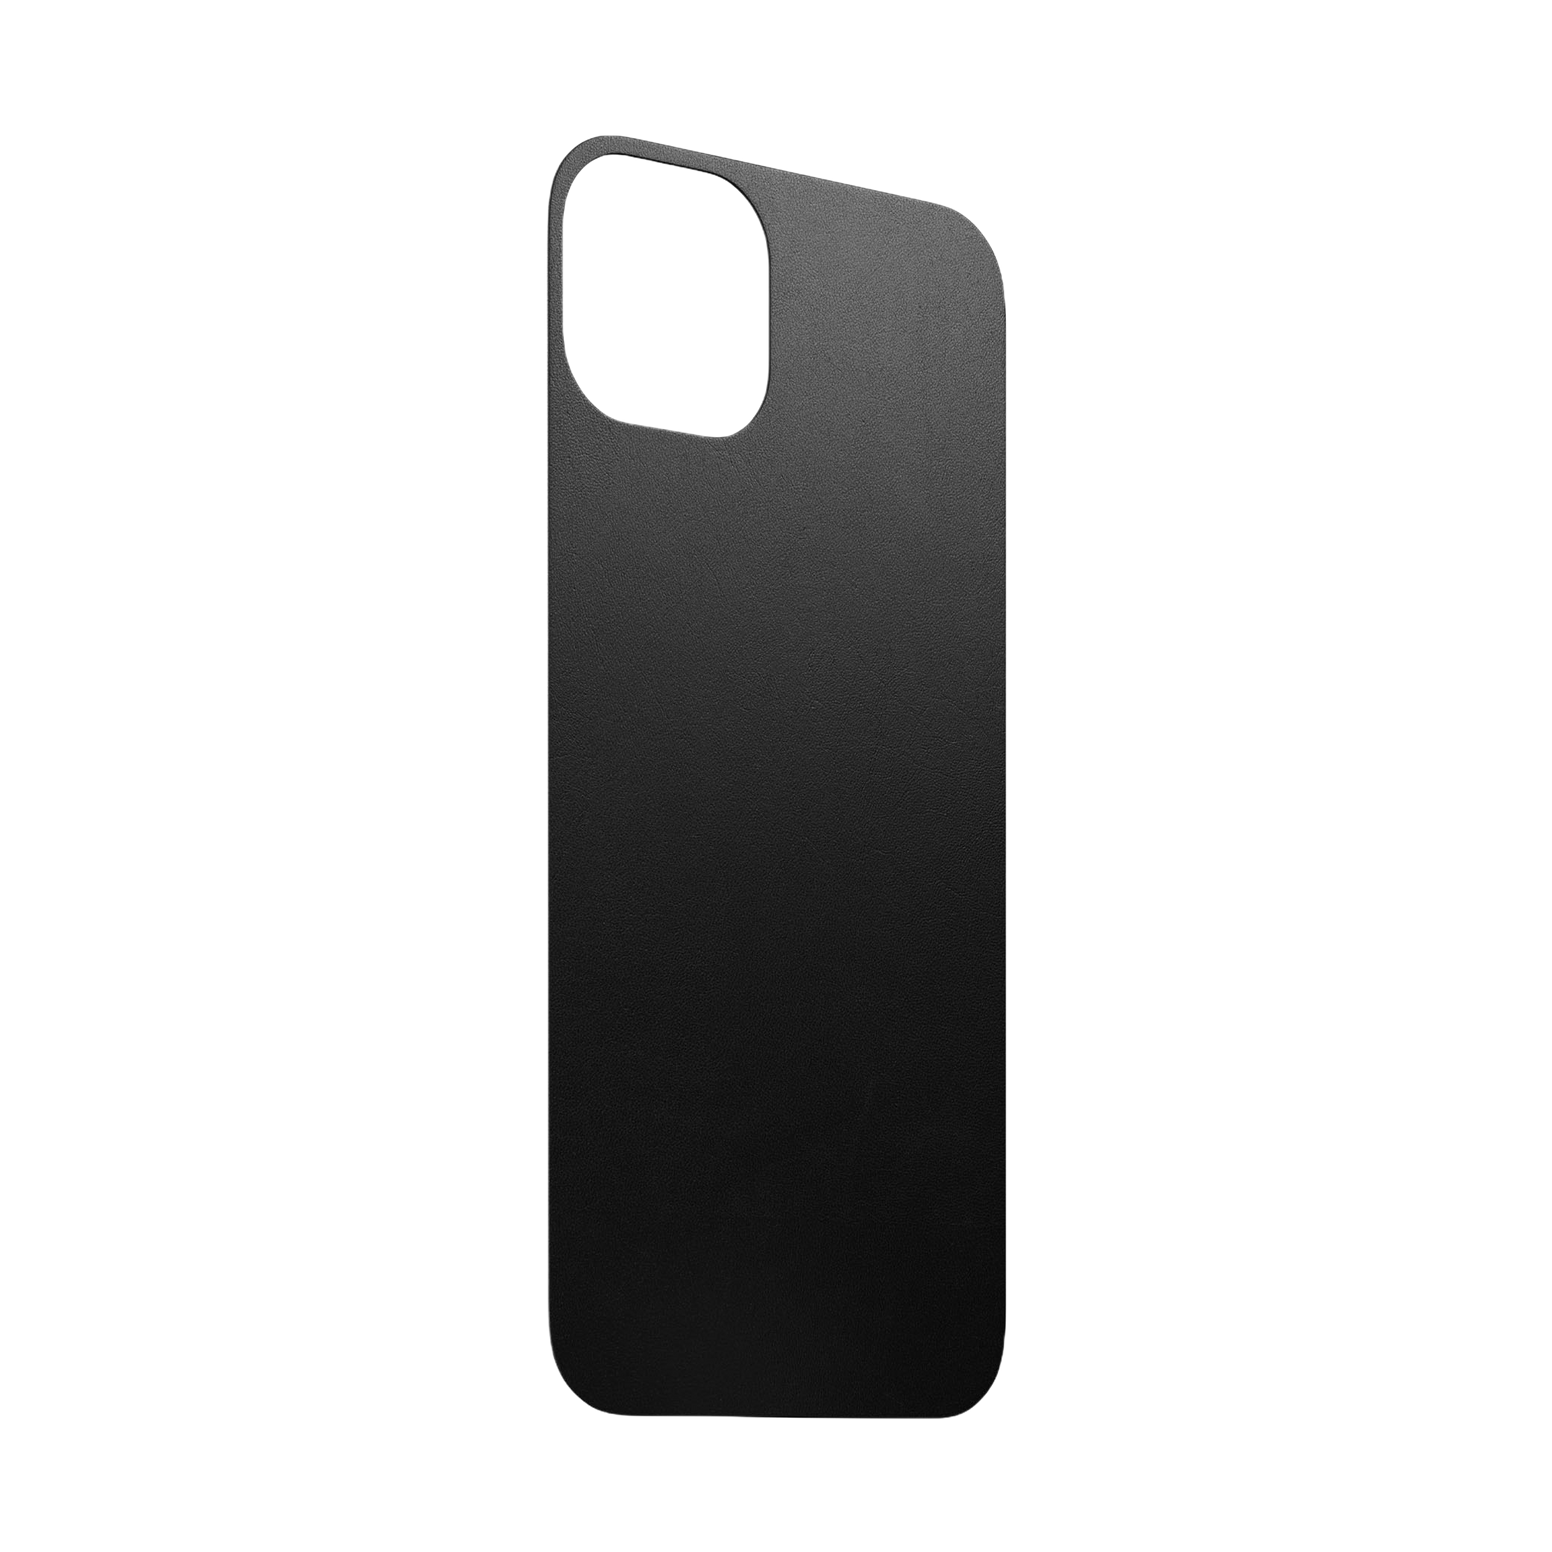 Nomad Skin with Horween Leather for iPhone 13 - Black - Discontinued